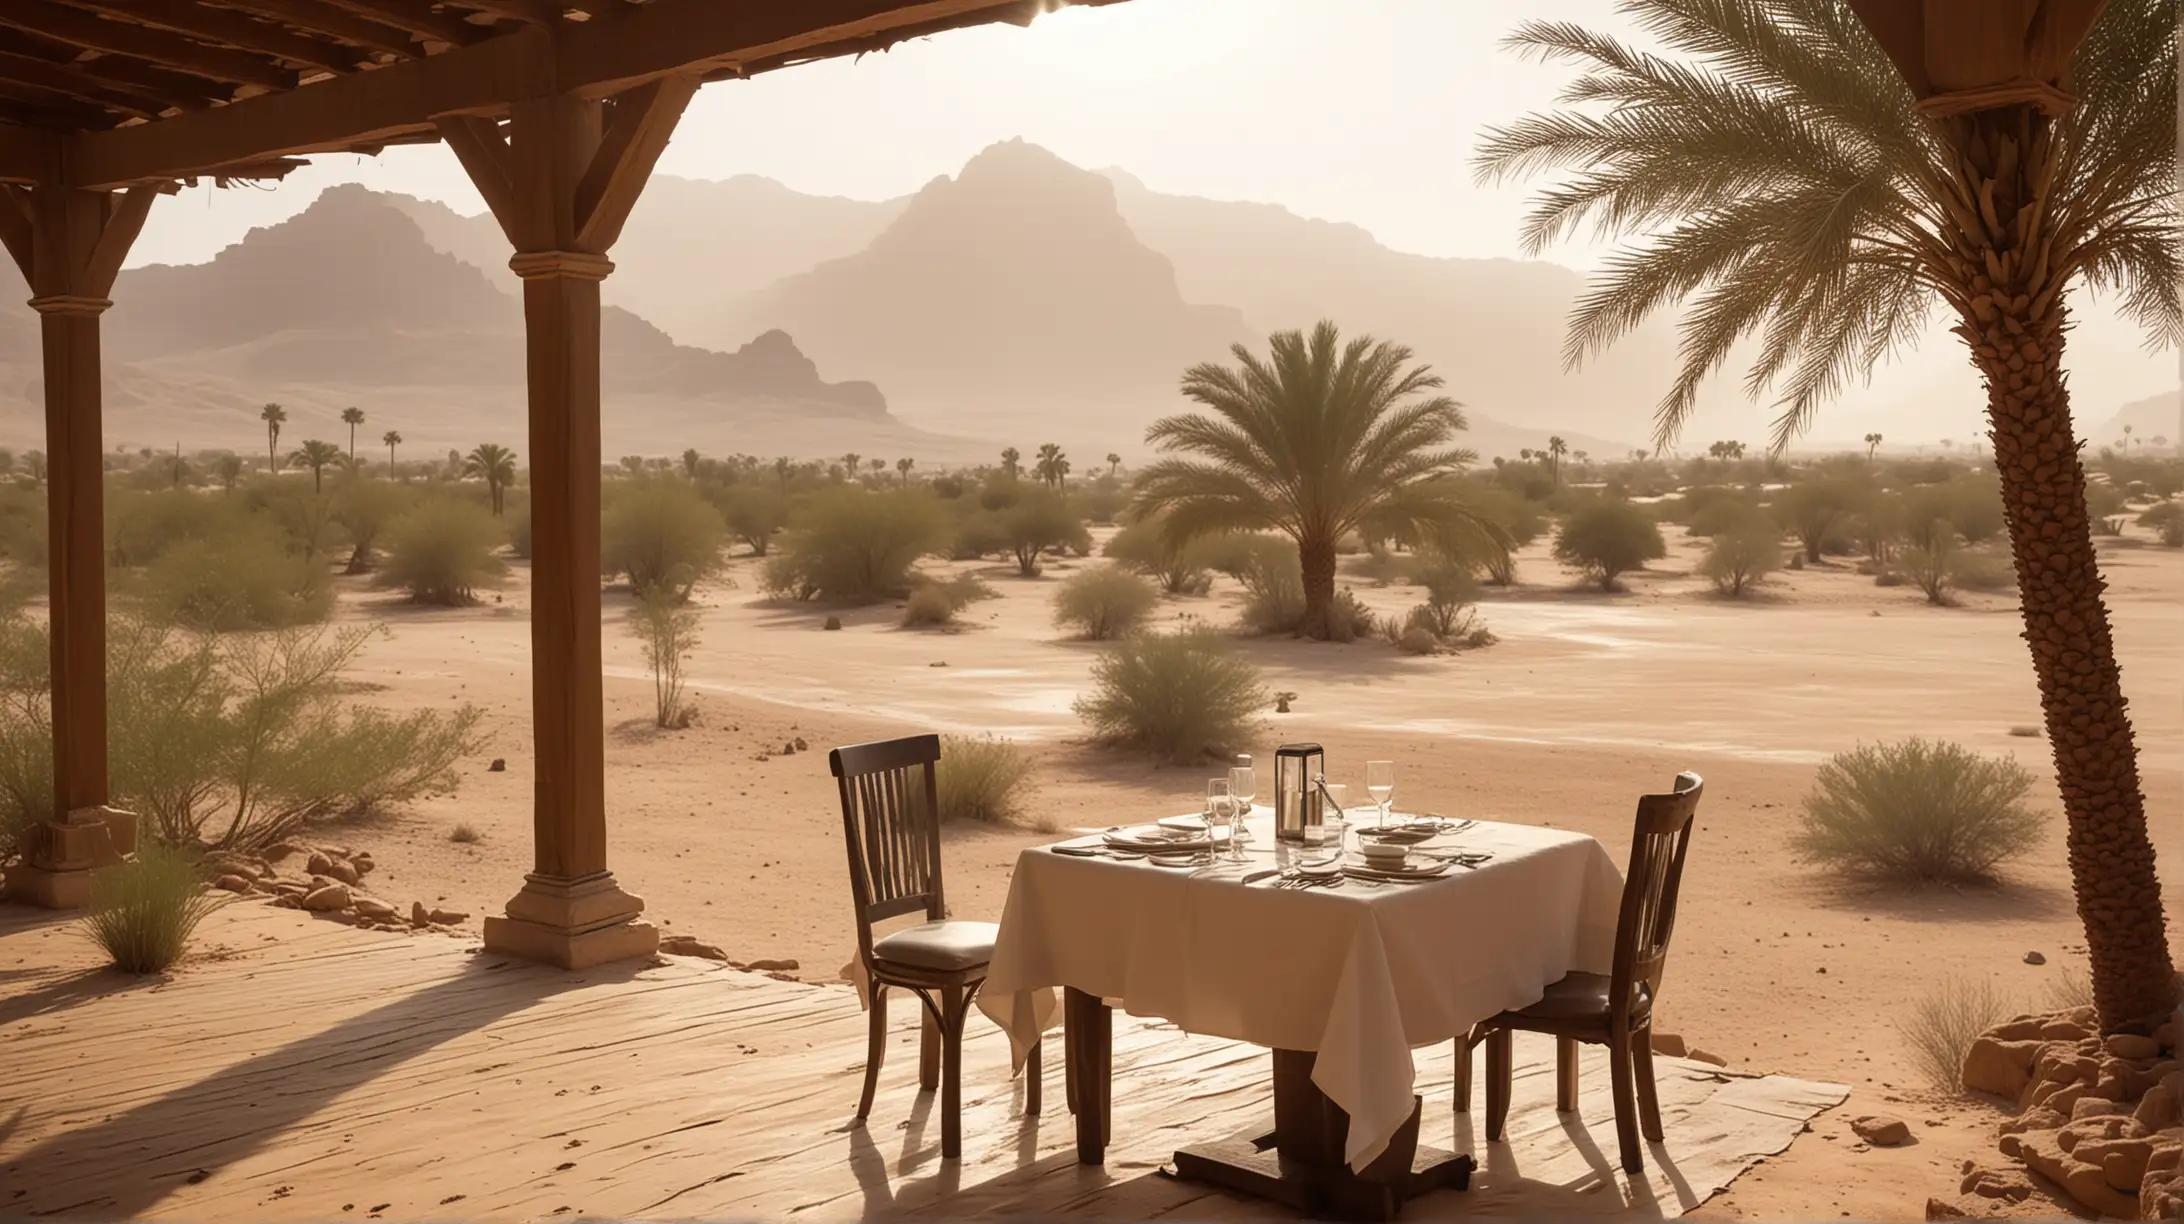 restaurant at a desert oasis, overlooking the oasis, fancy but run down, outdoor dining area with table for one, tablecloth on table, worn floor. There is an aura of mystery and a sandstorm is blowing.